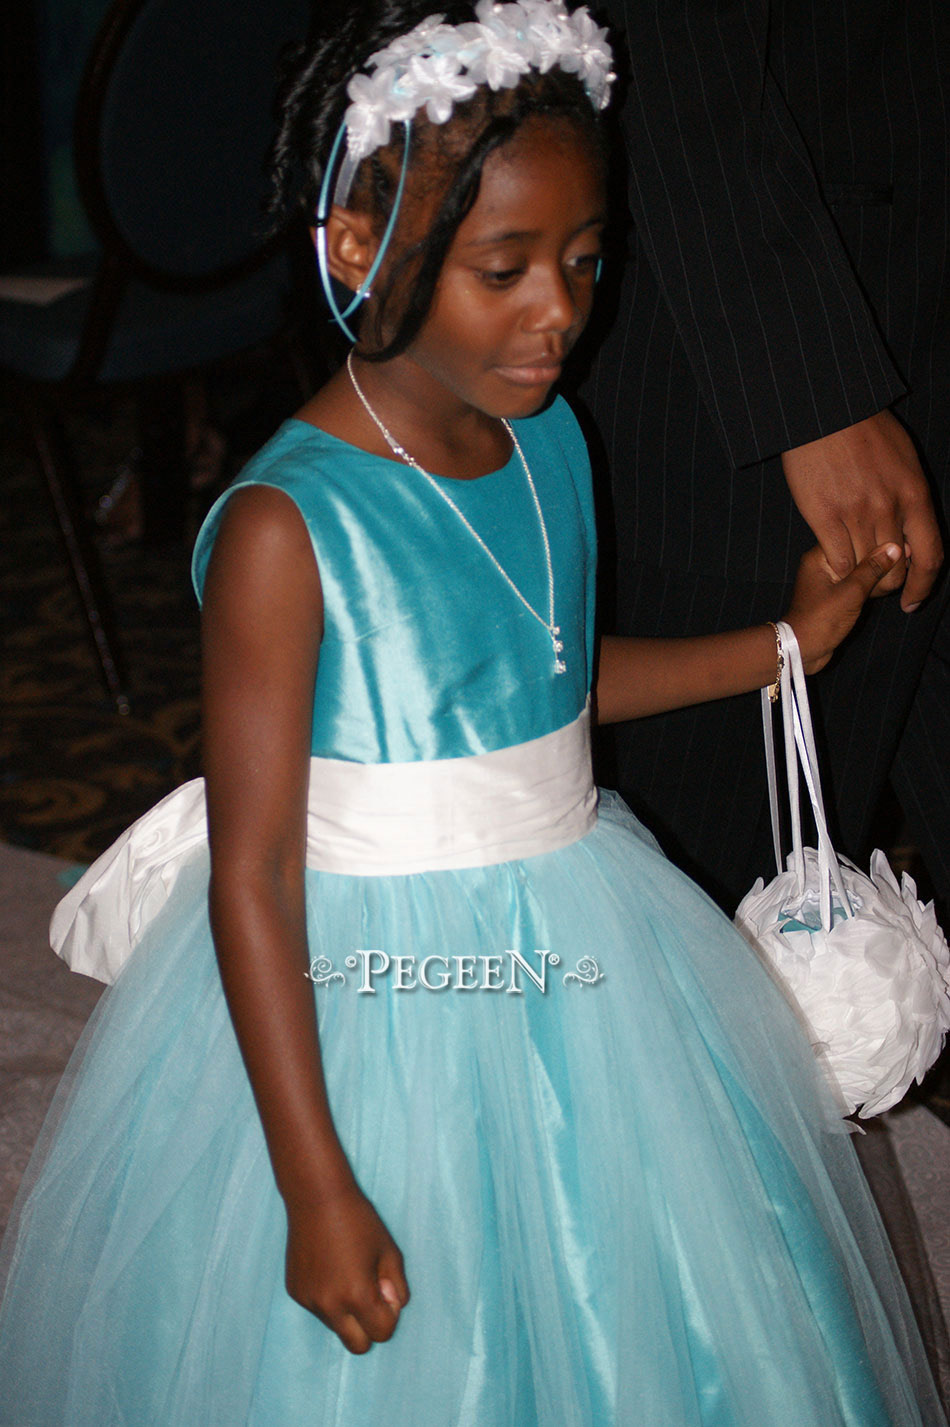 Flower girl dress in  Tiffany blue silk, Antique White with Aqua tulle | Pegeen